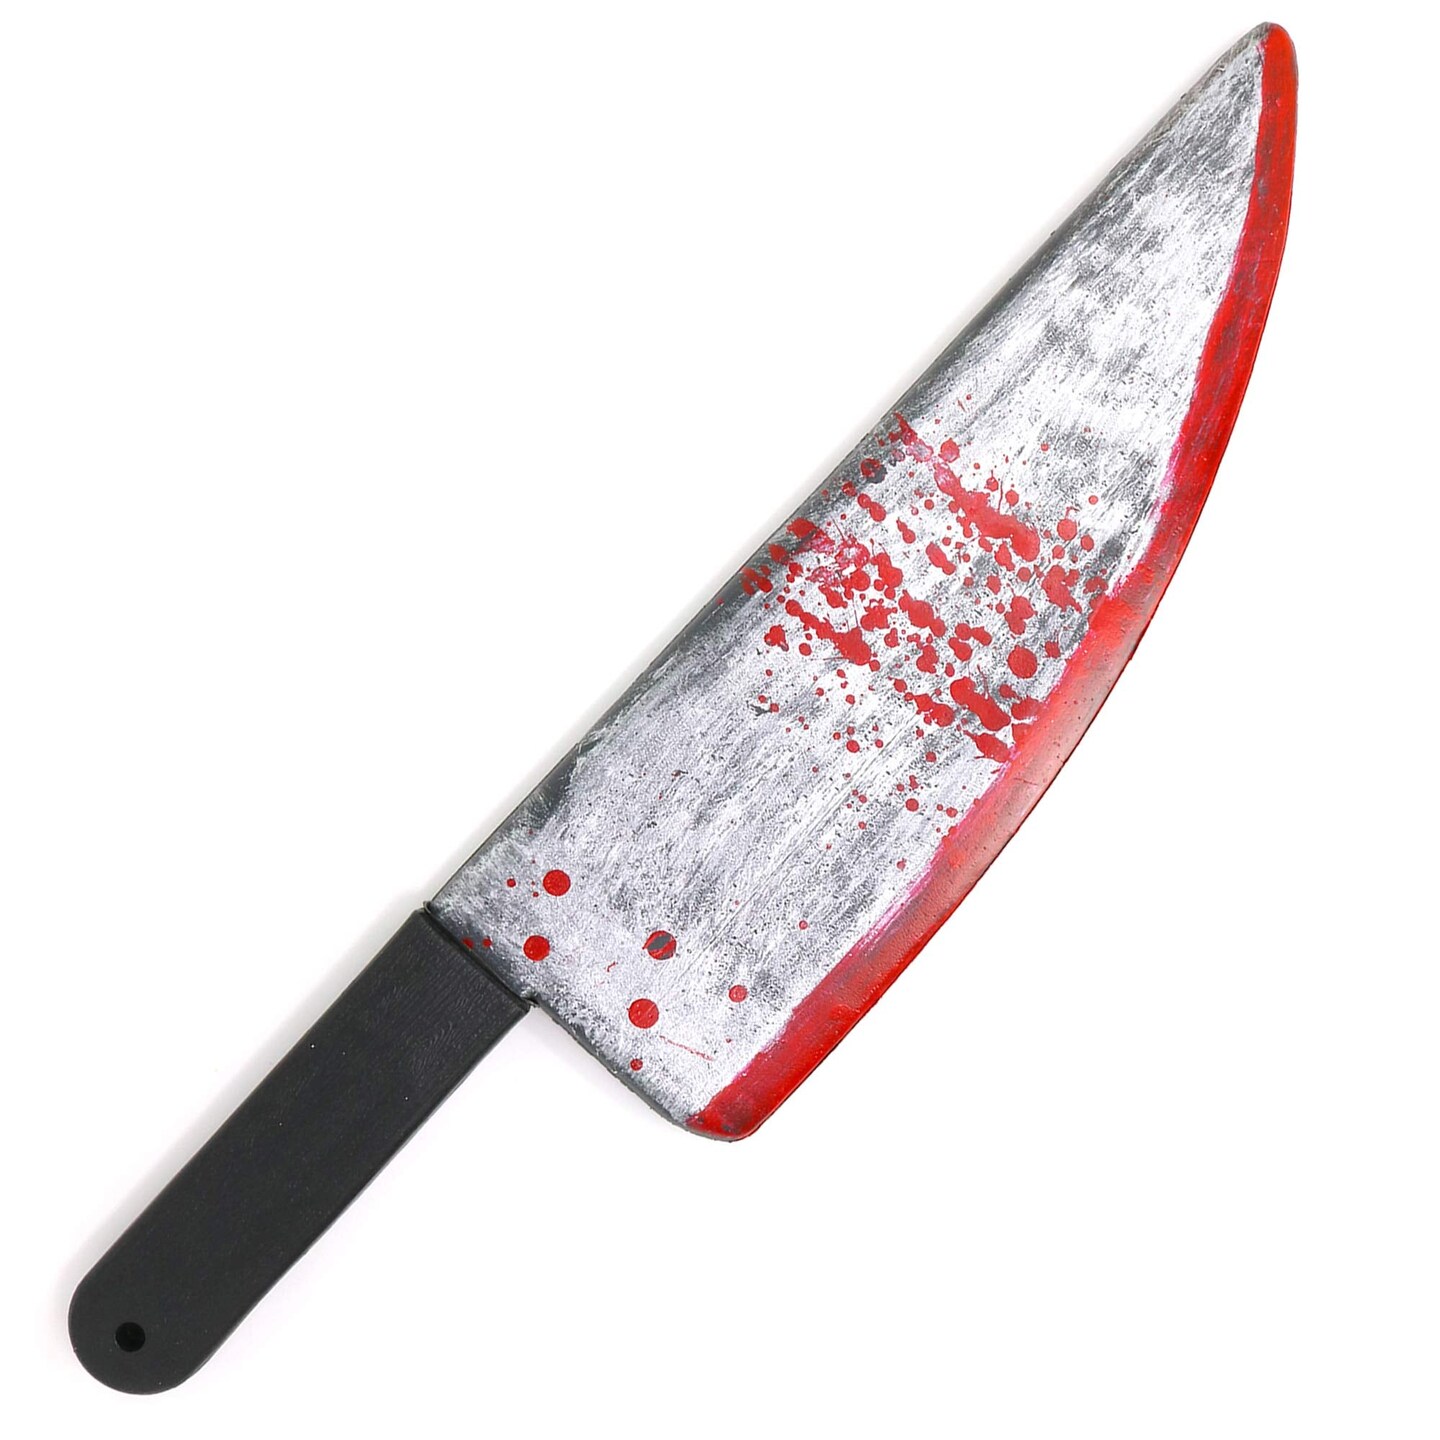 Large Bloody Knife 16" Long, Realistic Looking Prank Toy, Fake Plastop or Gag Blade for 